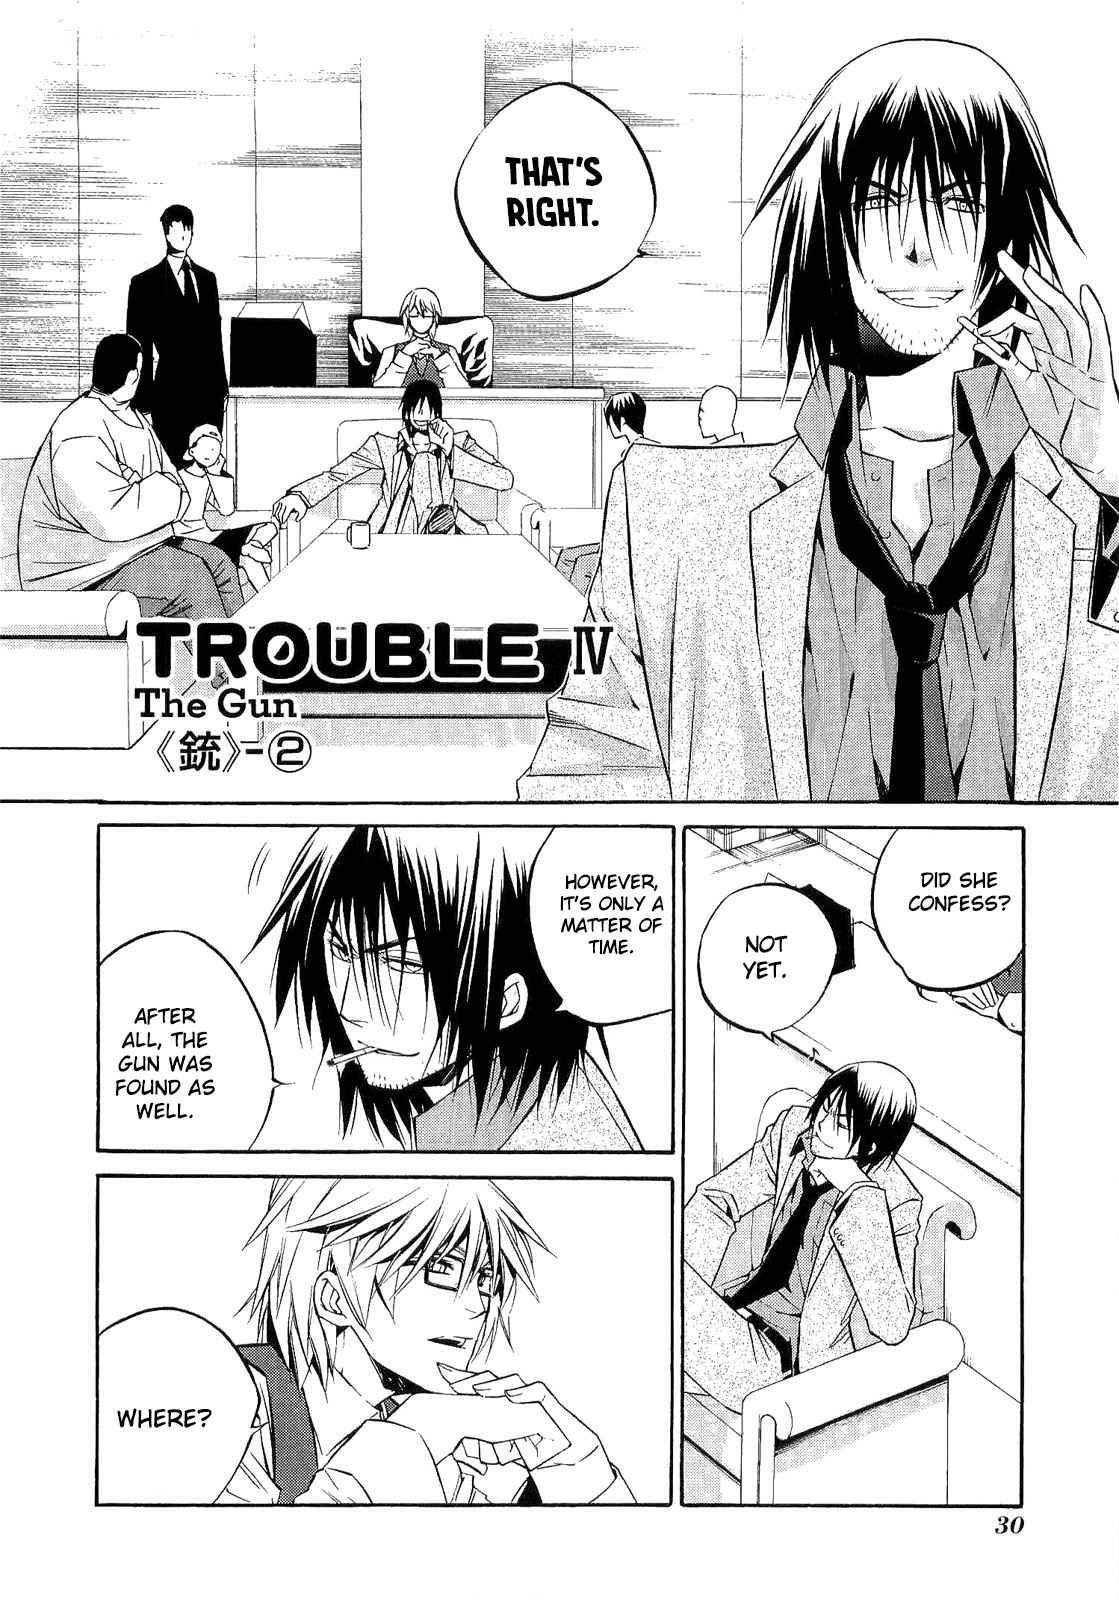 893 Ways to Become a Detective Vol. 3 Ch. 18 The Gun 2